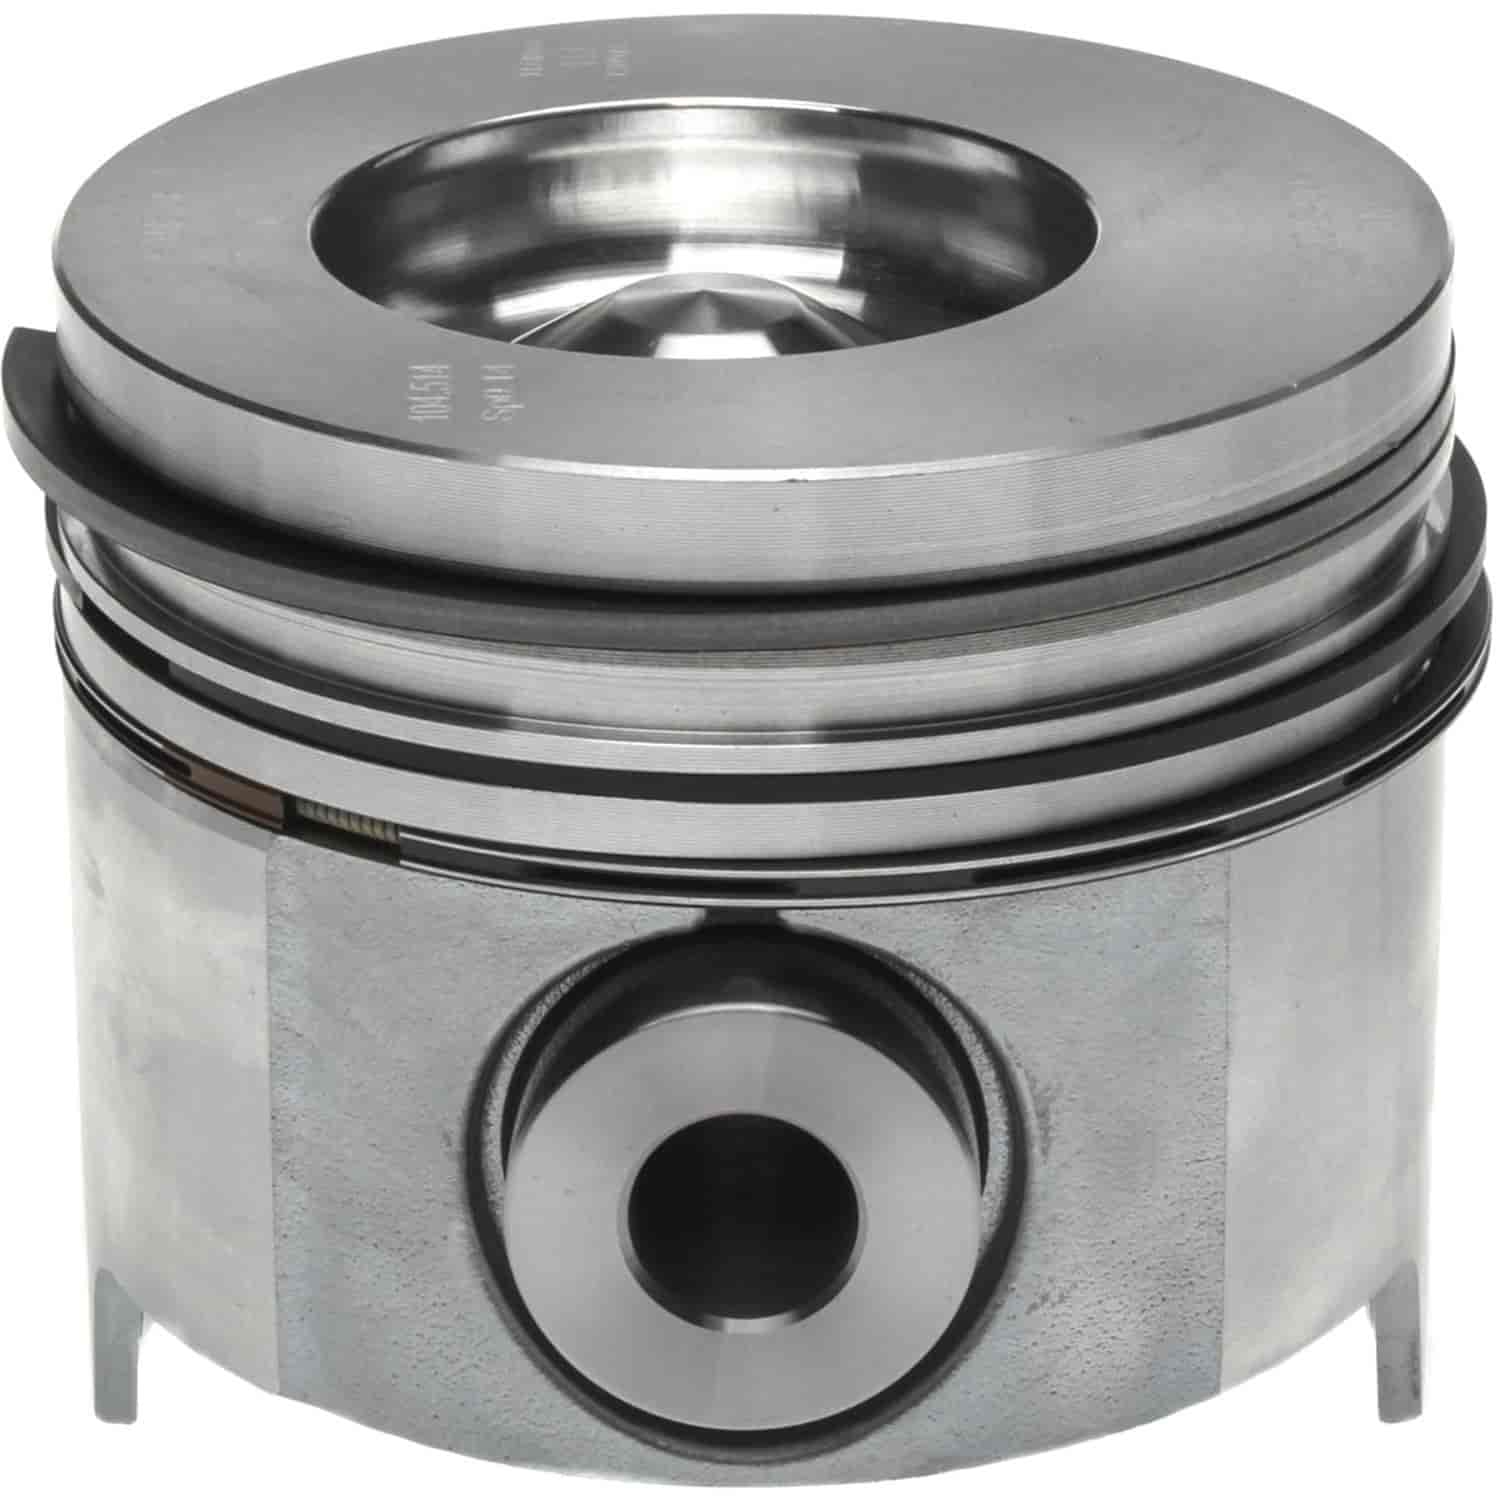 Piston Set With Rings 1994-2003 Ford/Navistar Powerstroke Diesel V8 7.3L with 4.120" Bore (+.010") Reduced Compression